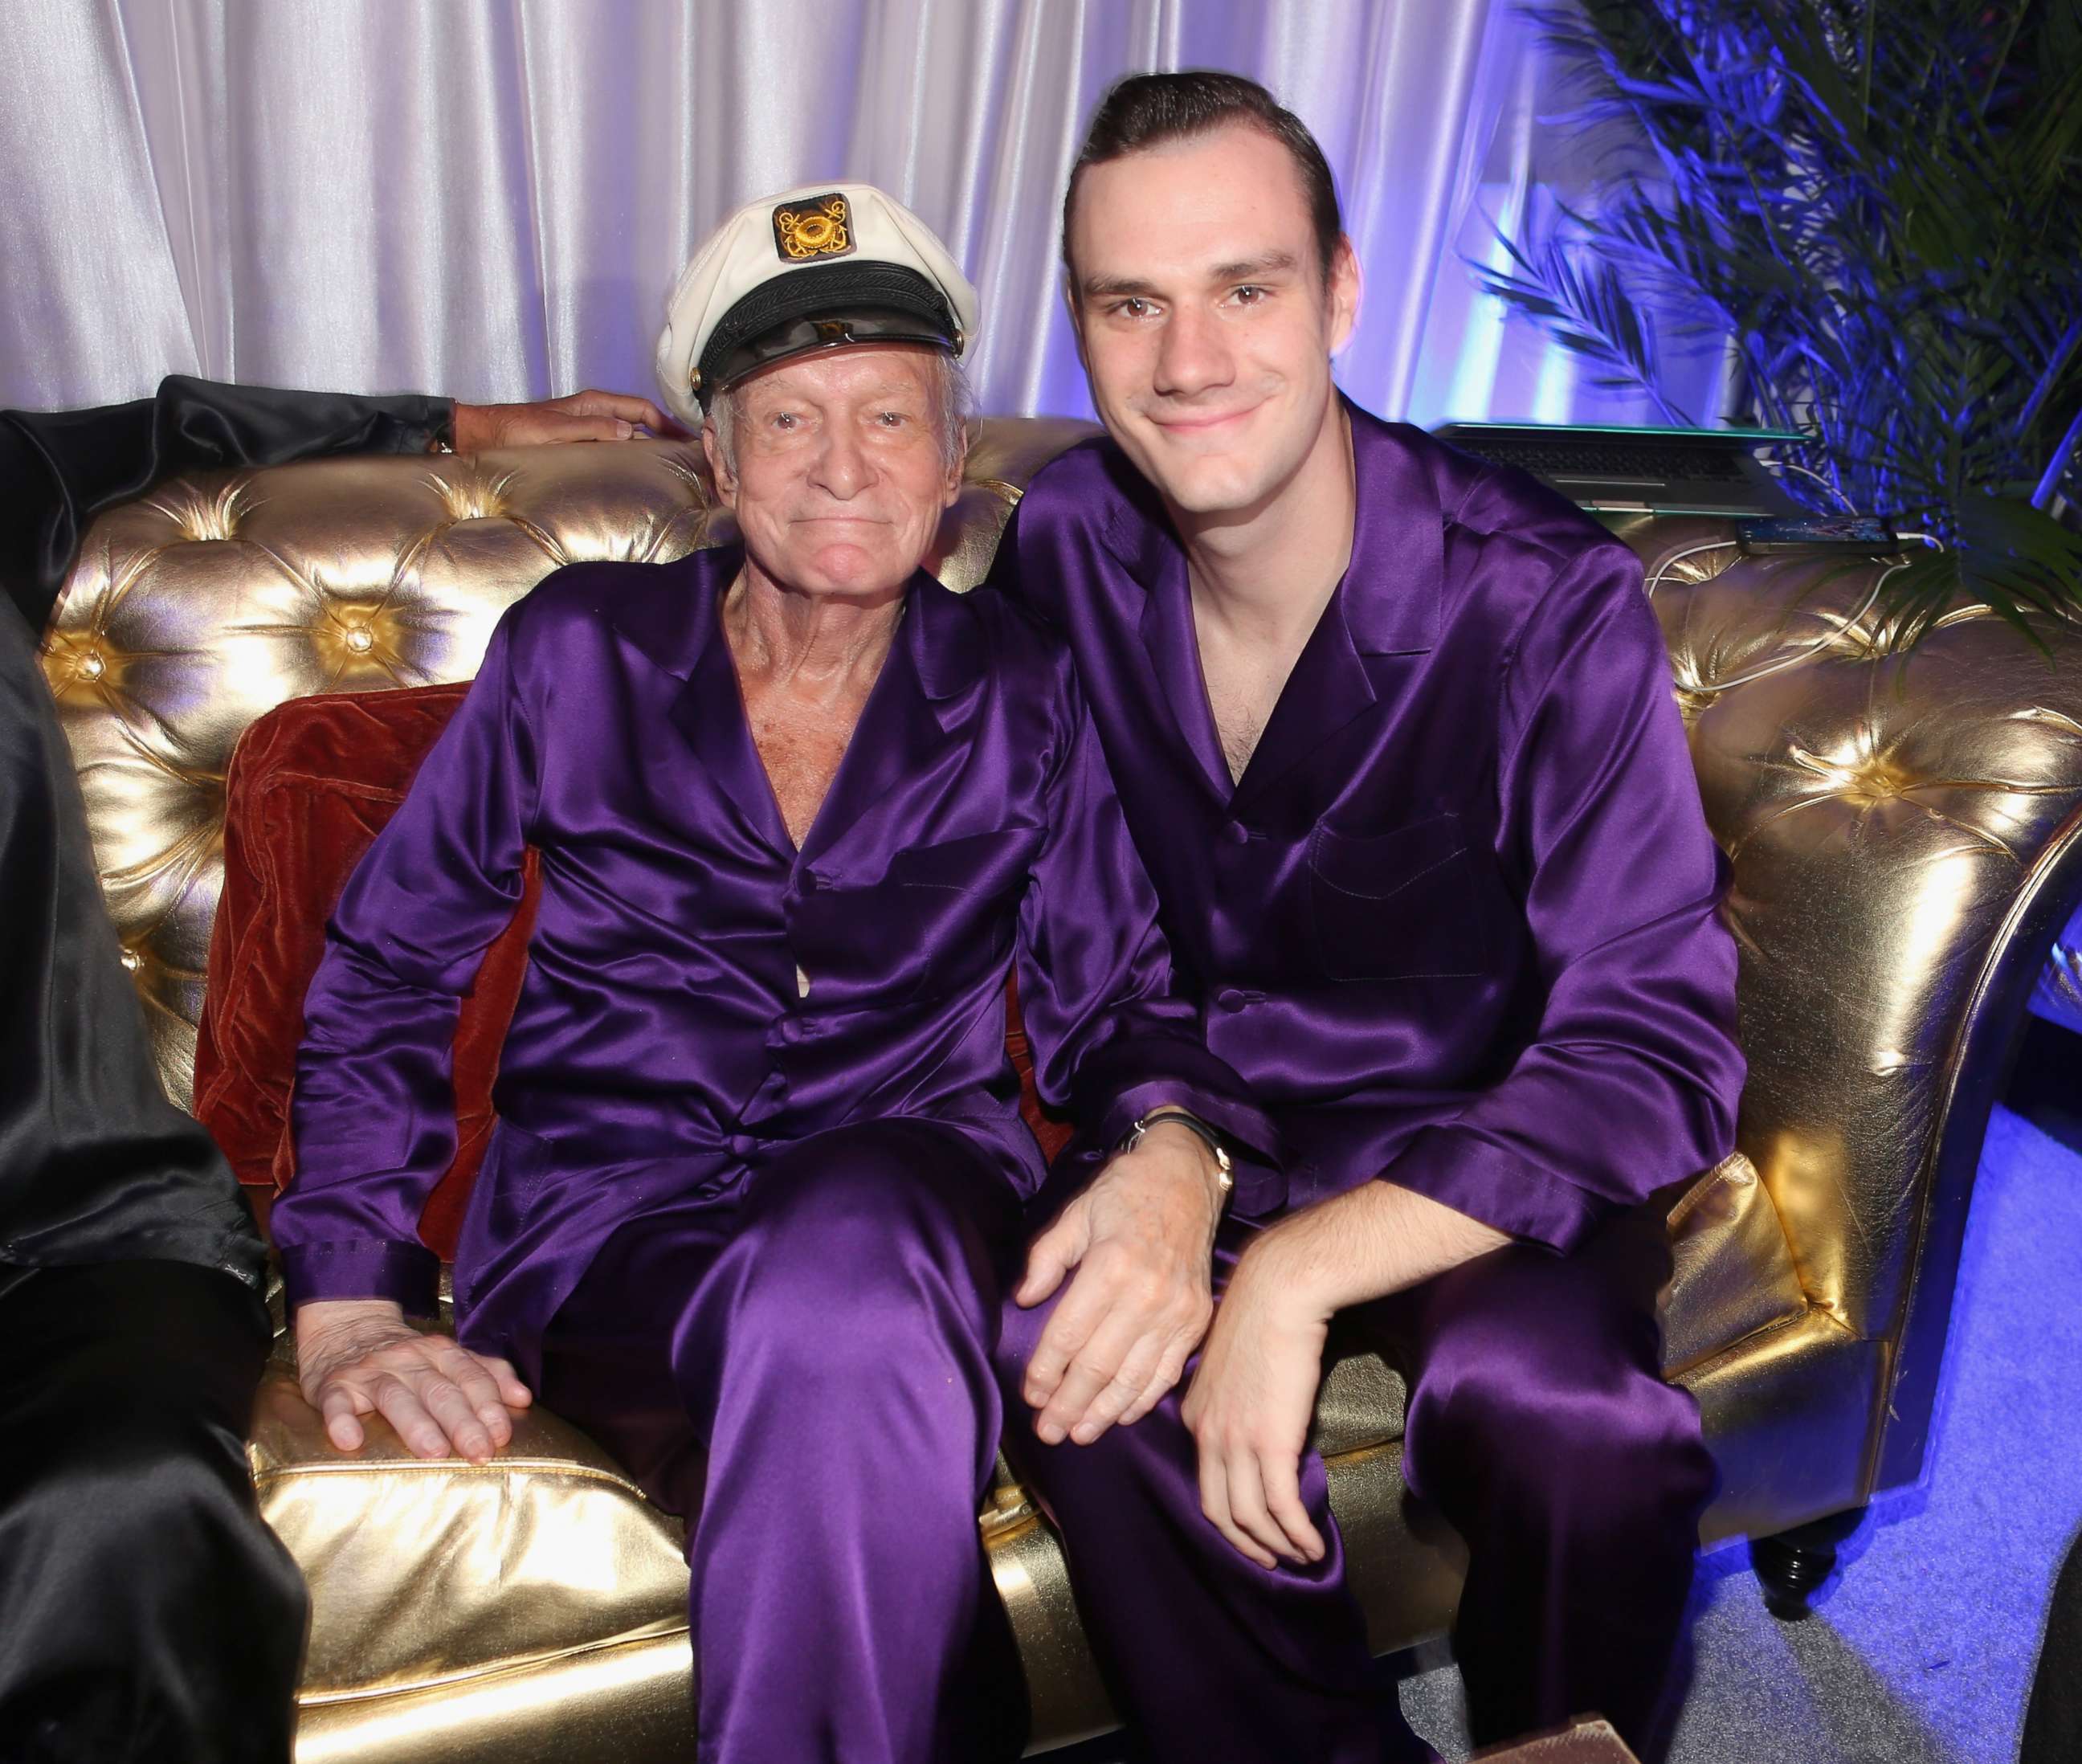 PHOTO: Hugh Hefner and Cooper Hefner attend the Annual Midsummer Night's Dream Party at the Playboy Mansion on Aug. 16, 2014 in Holmby Hills, California.